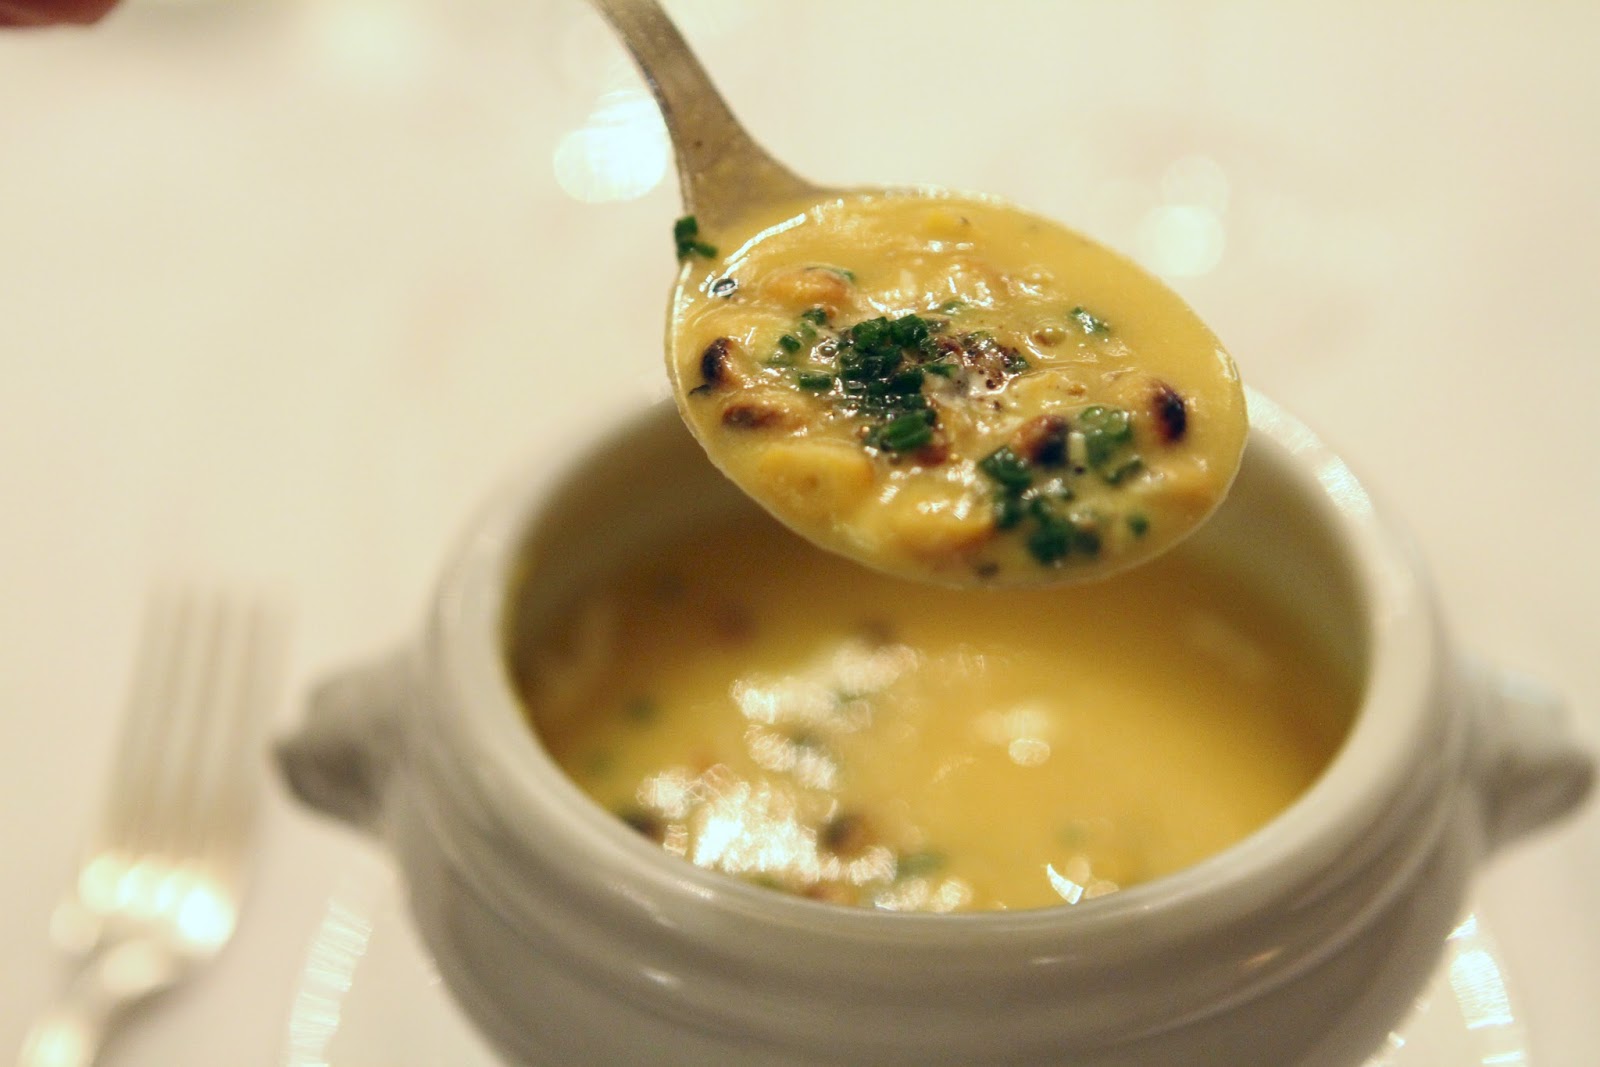 The Savoy grill spiced sweetcorn soup